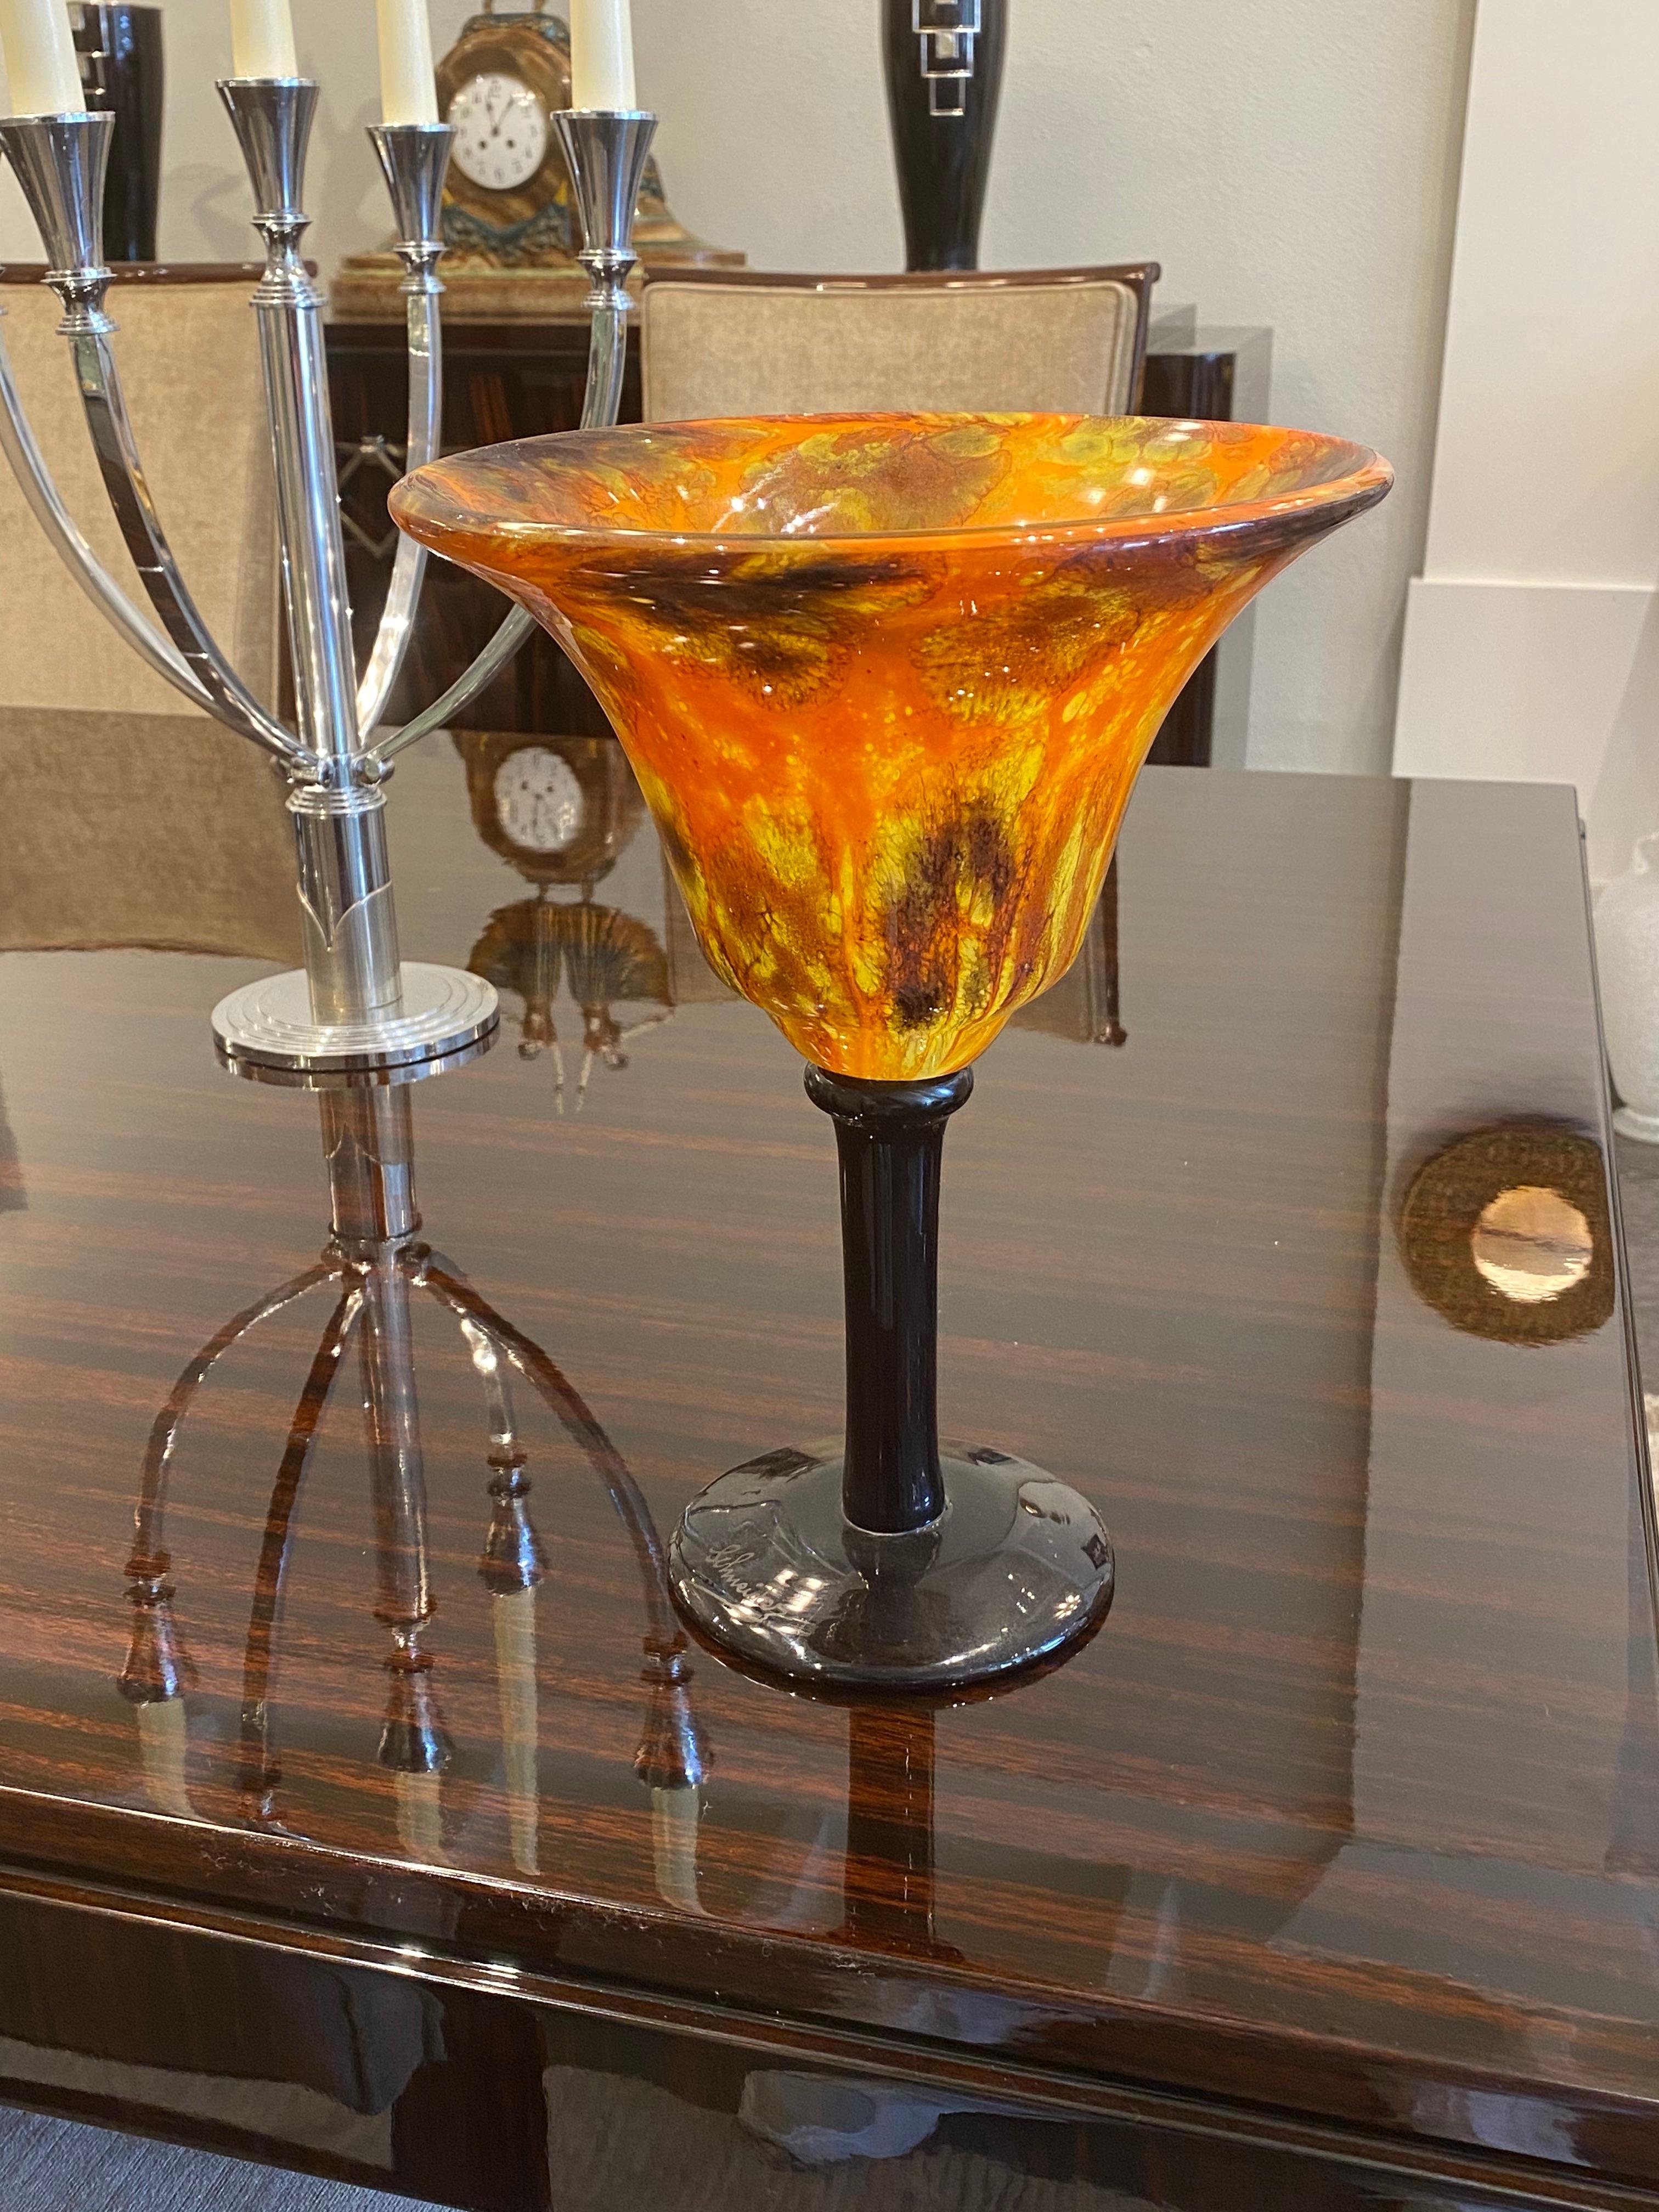 A goblet in Red, Orange, Yellow and speckled Brown in powdered glass.  Stem and foot in Violet powdered glass.  This piece belongs to the Marbrines serie from Charles Schnedier.
Signature: Schneider

Charles Schneider was a renowned glassmaker